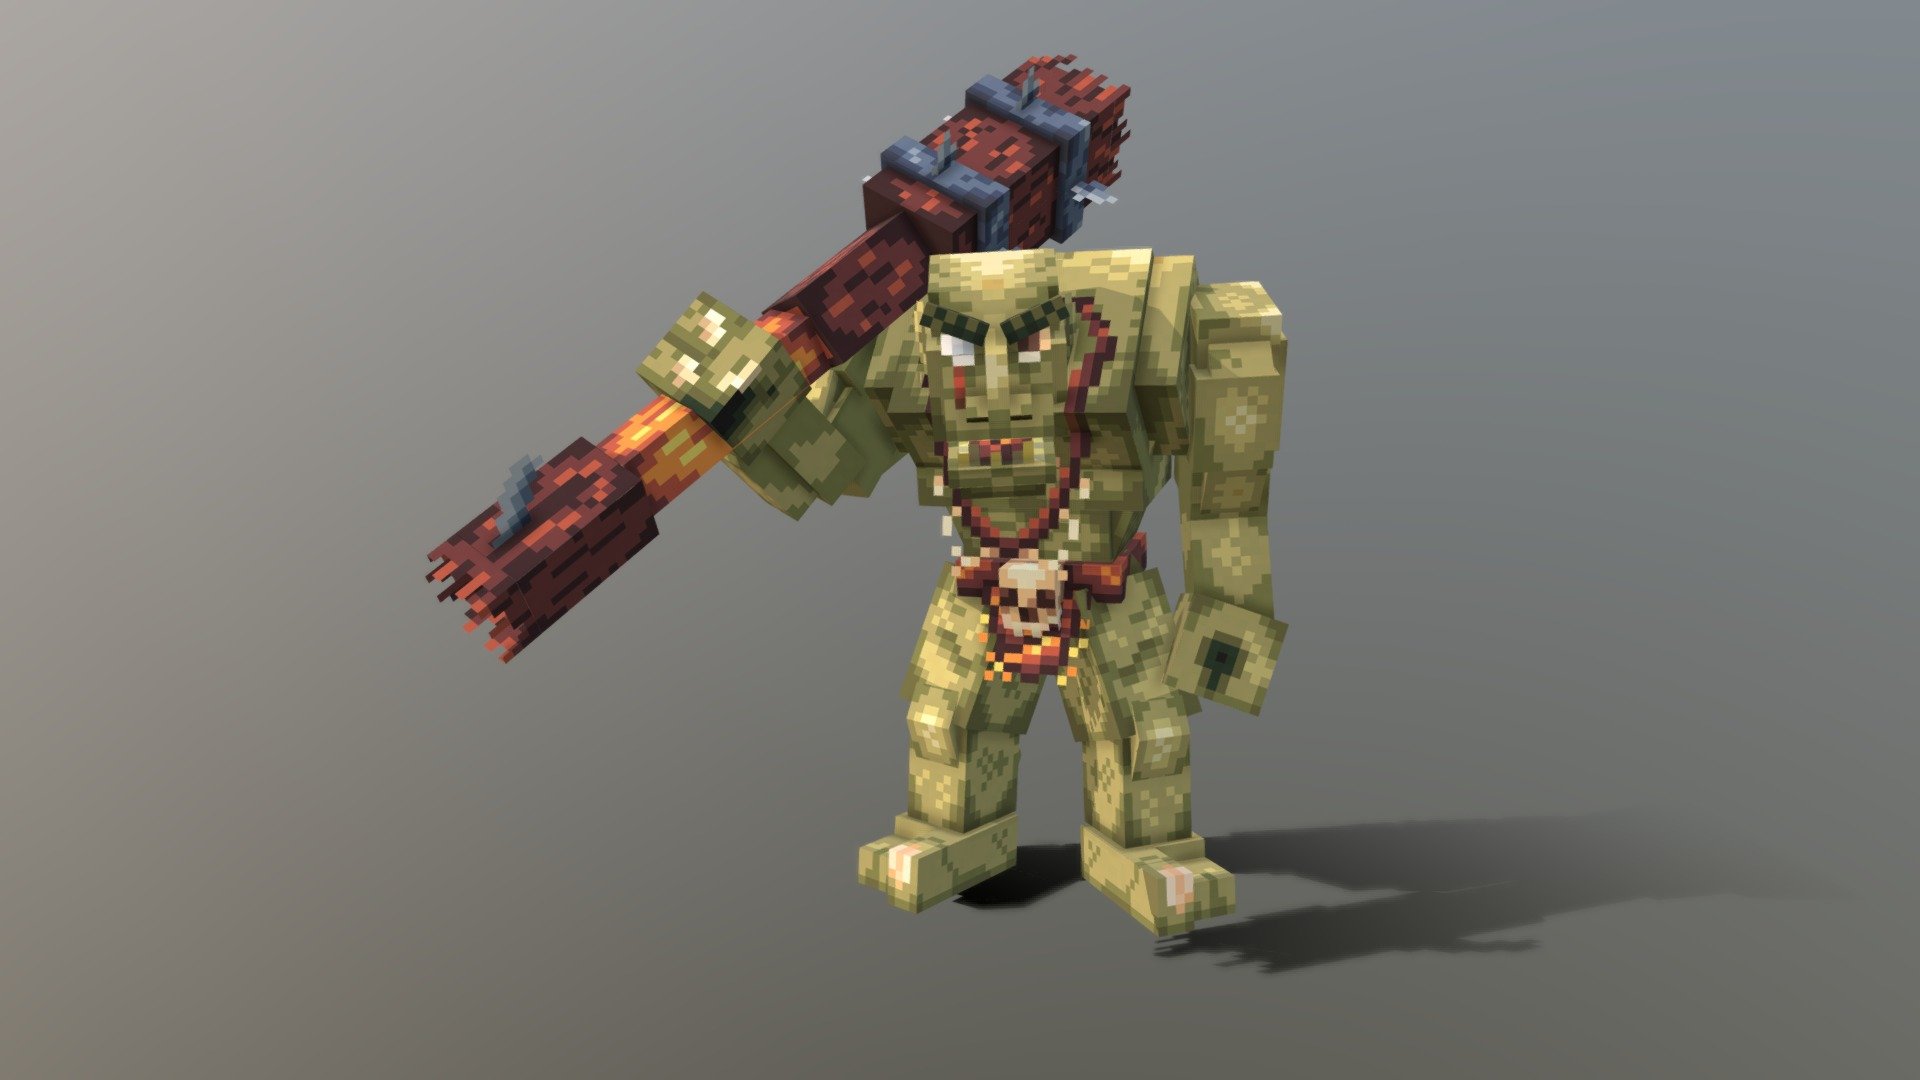 An ogre (feminine: ogress) is a legendary monster usually depicted as a large, hideous, man-like being that eats ordinary human beings, especially infants and children.




An Ogre for Model Engine plugin.




Texture resolution - 32x32 

Fully animated: Idle, walk, attack(2 types) and death

For questions, please contact here: kaputtt#6610 - Wild Ogre [Model Engine] - 3D model by Kaput-protivogaz 3d model